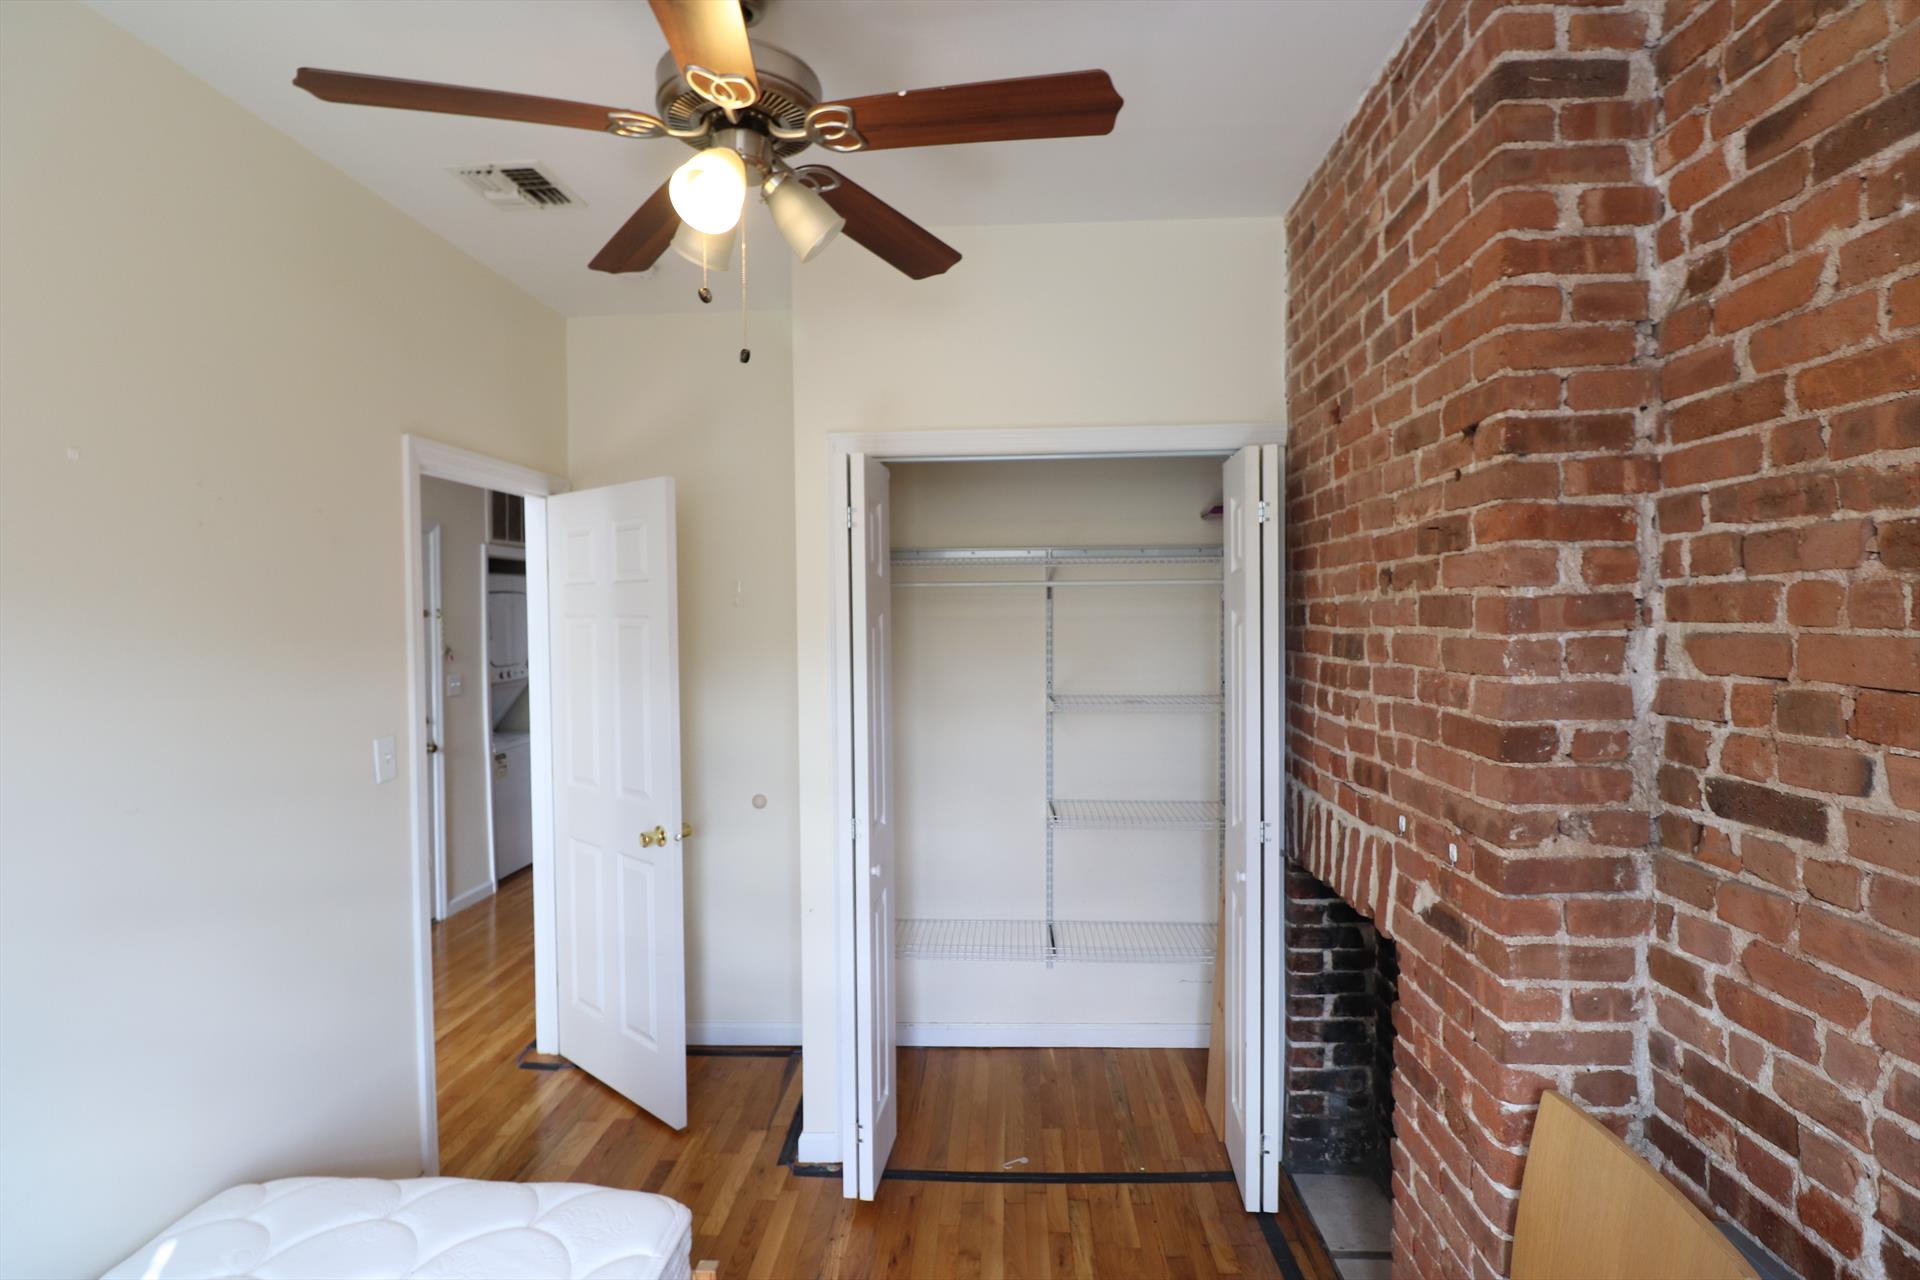 Terrific large 3 bedroom featuring exposed brick and Washer/ dryer in the unit! Other features include;  oversized living space, hardwood floors, tiled bath with full tub, good size bedrooms, high ceilings, and central heat and AC. This central location on Washington st, close to shopping and all transportation. Available July 1st. One month broker fee